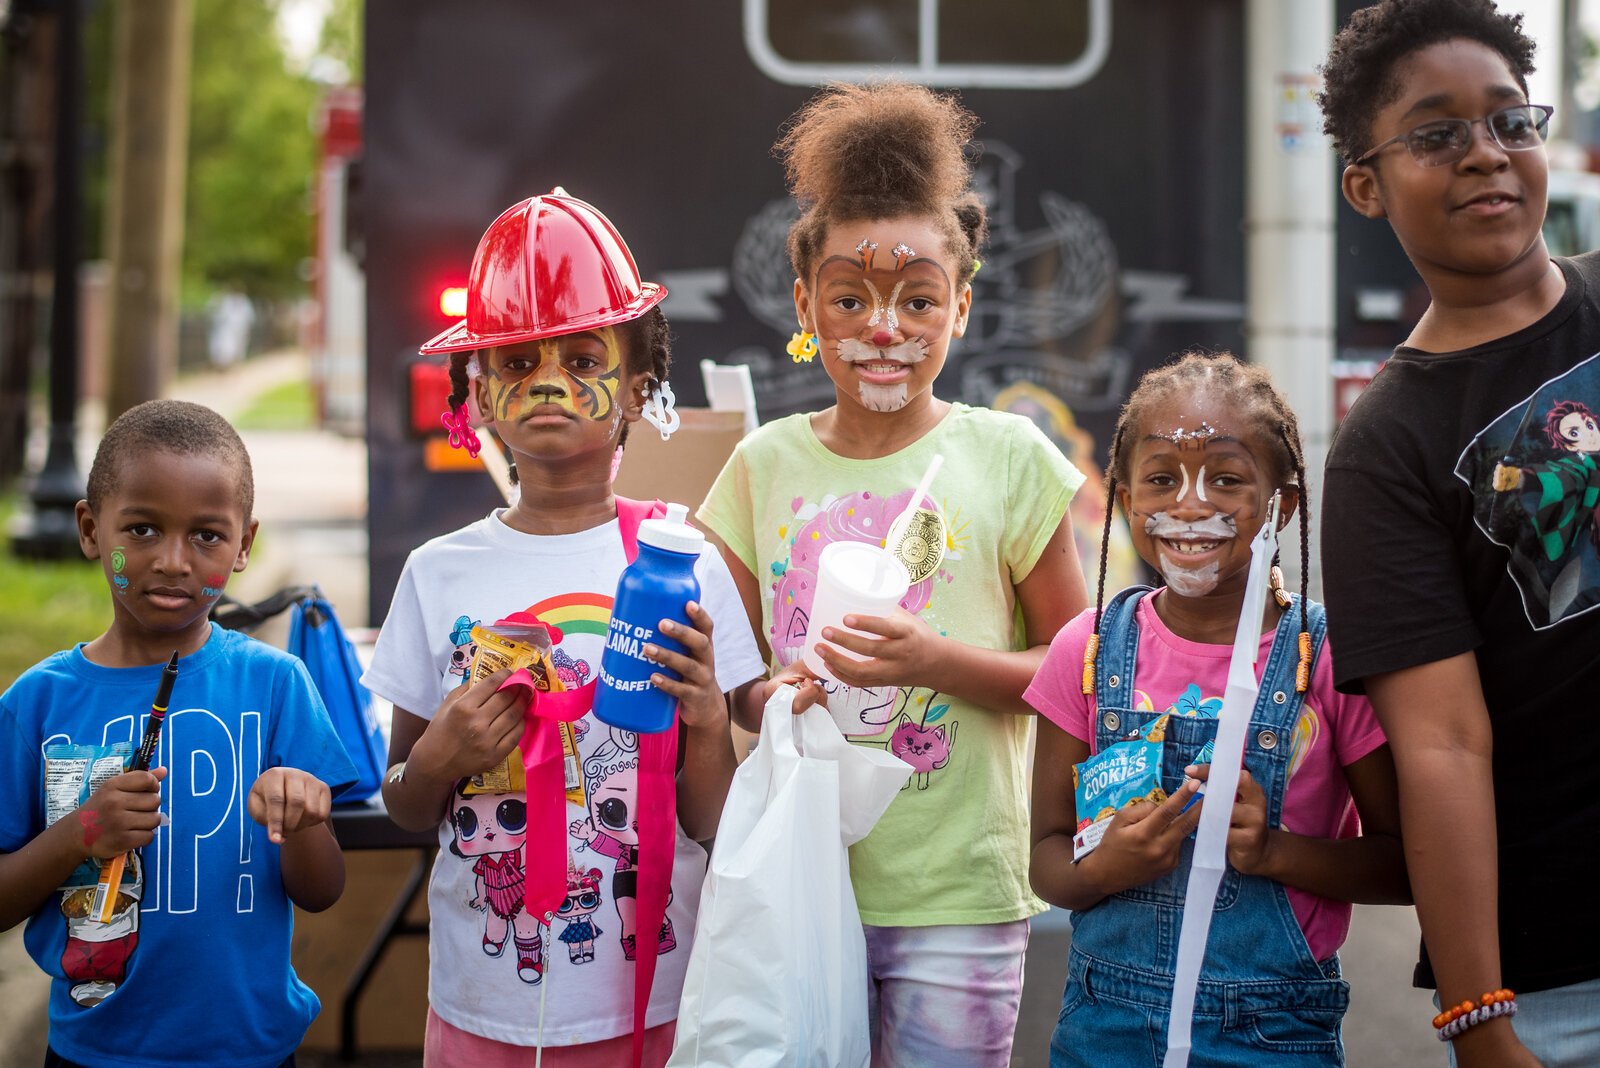 On National Night Out in the Northside:  "I love this one. I was surprised the kids stopped and did that for me because you know they tend to be a little huffy. They were having a good time."